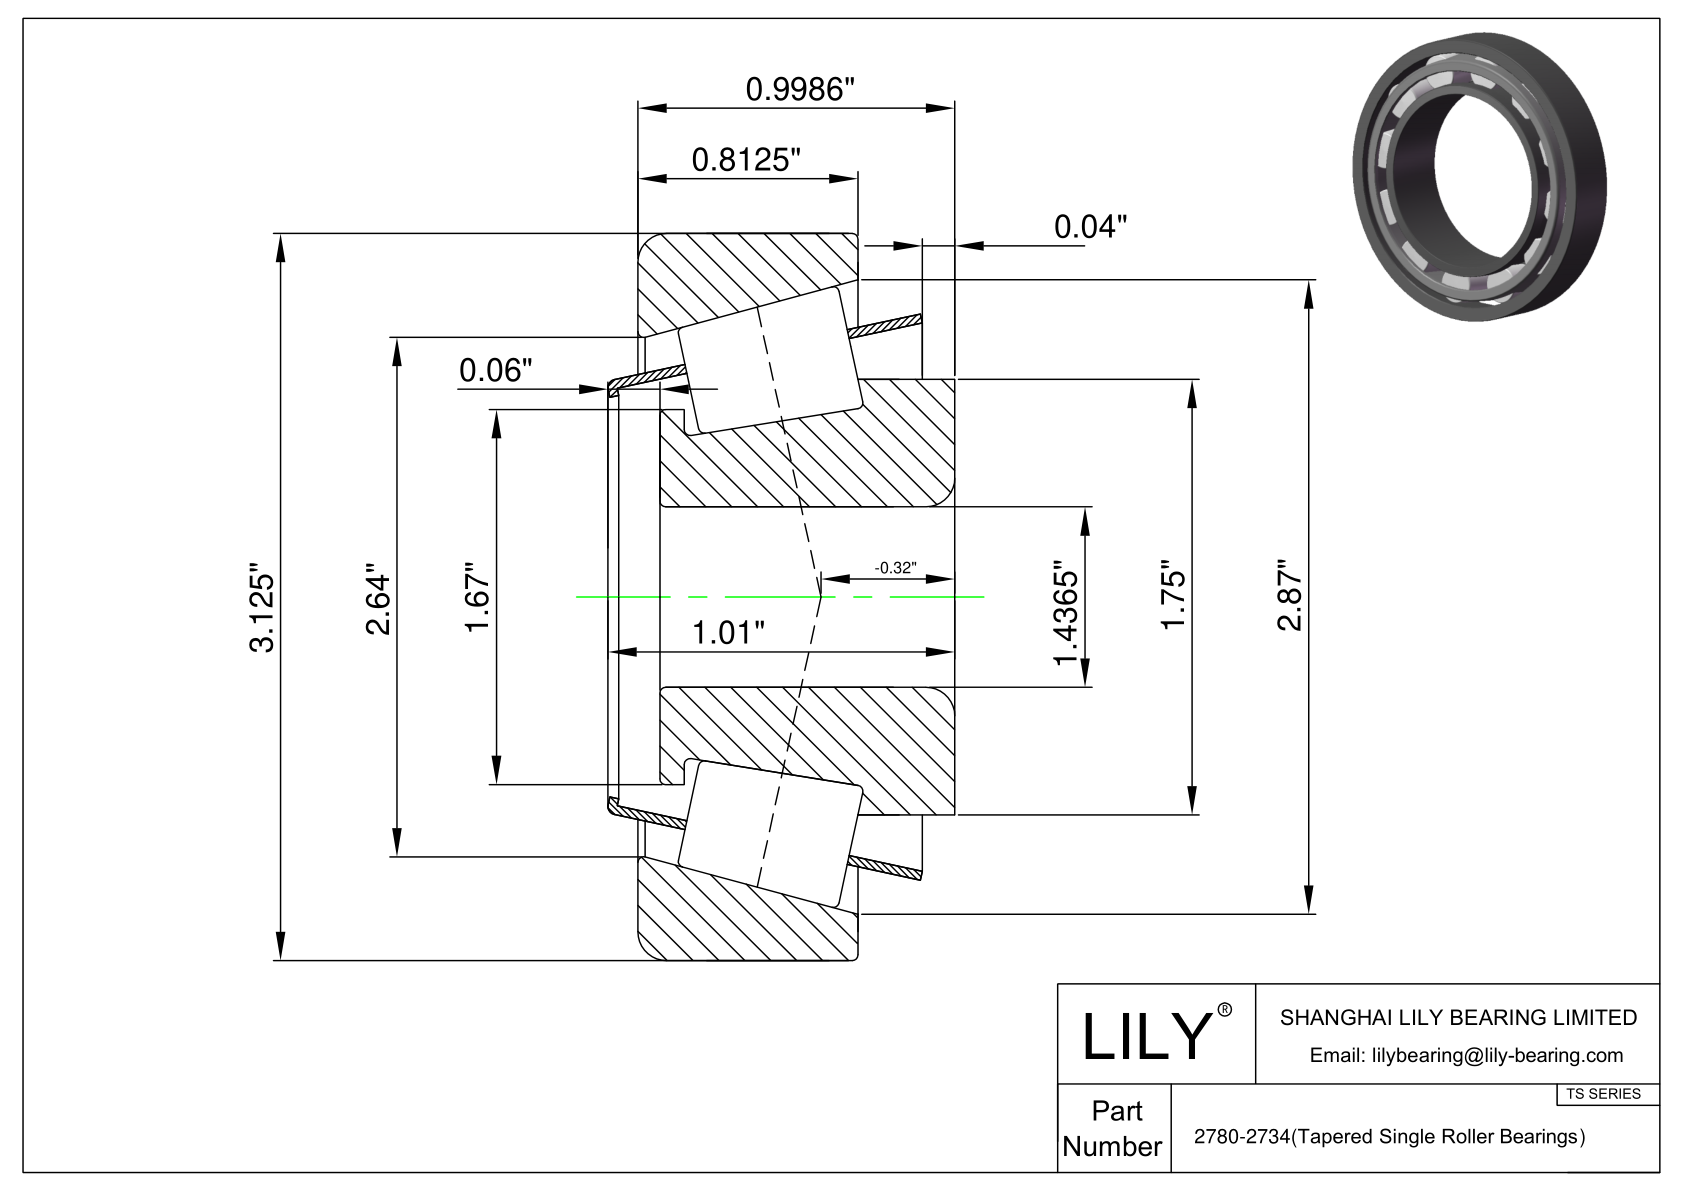 2780-2734 TS (Tapered Single Roller Bearings) (Imperial) cad drawing